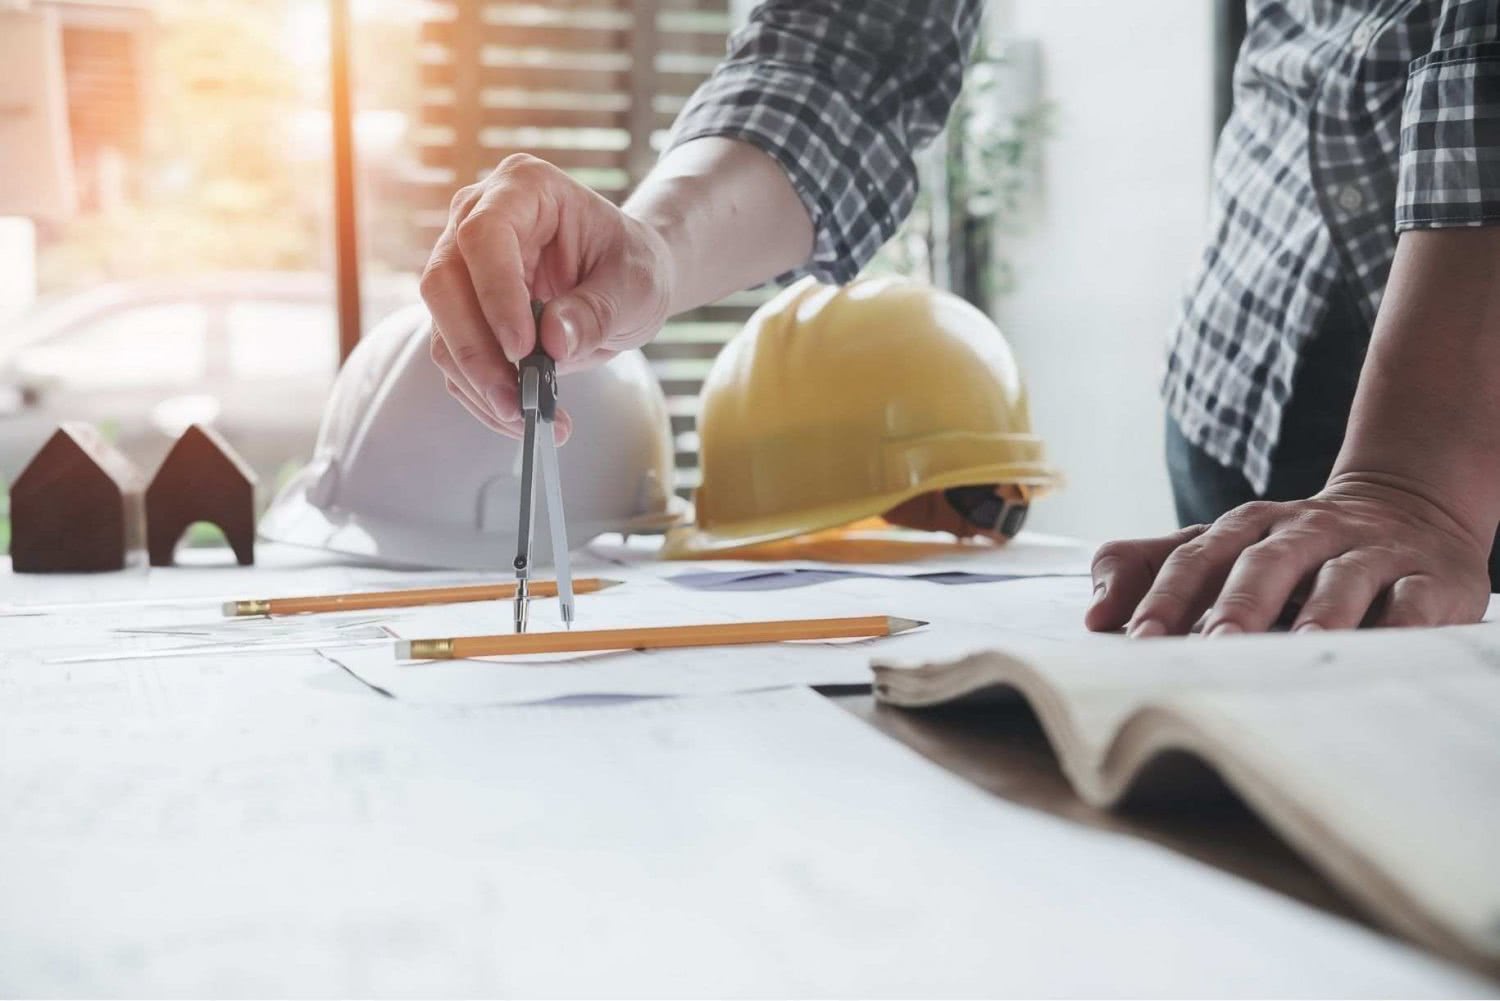 Architect with compass, construction plans, construction site helmet on table